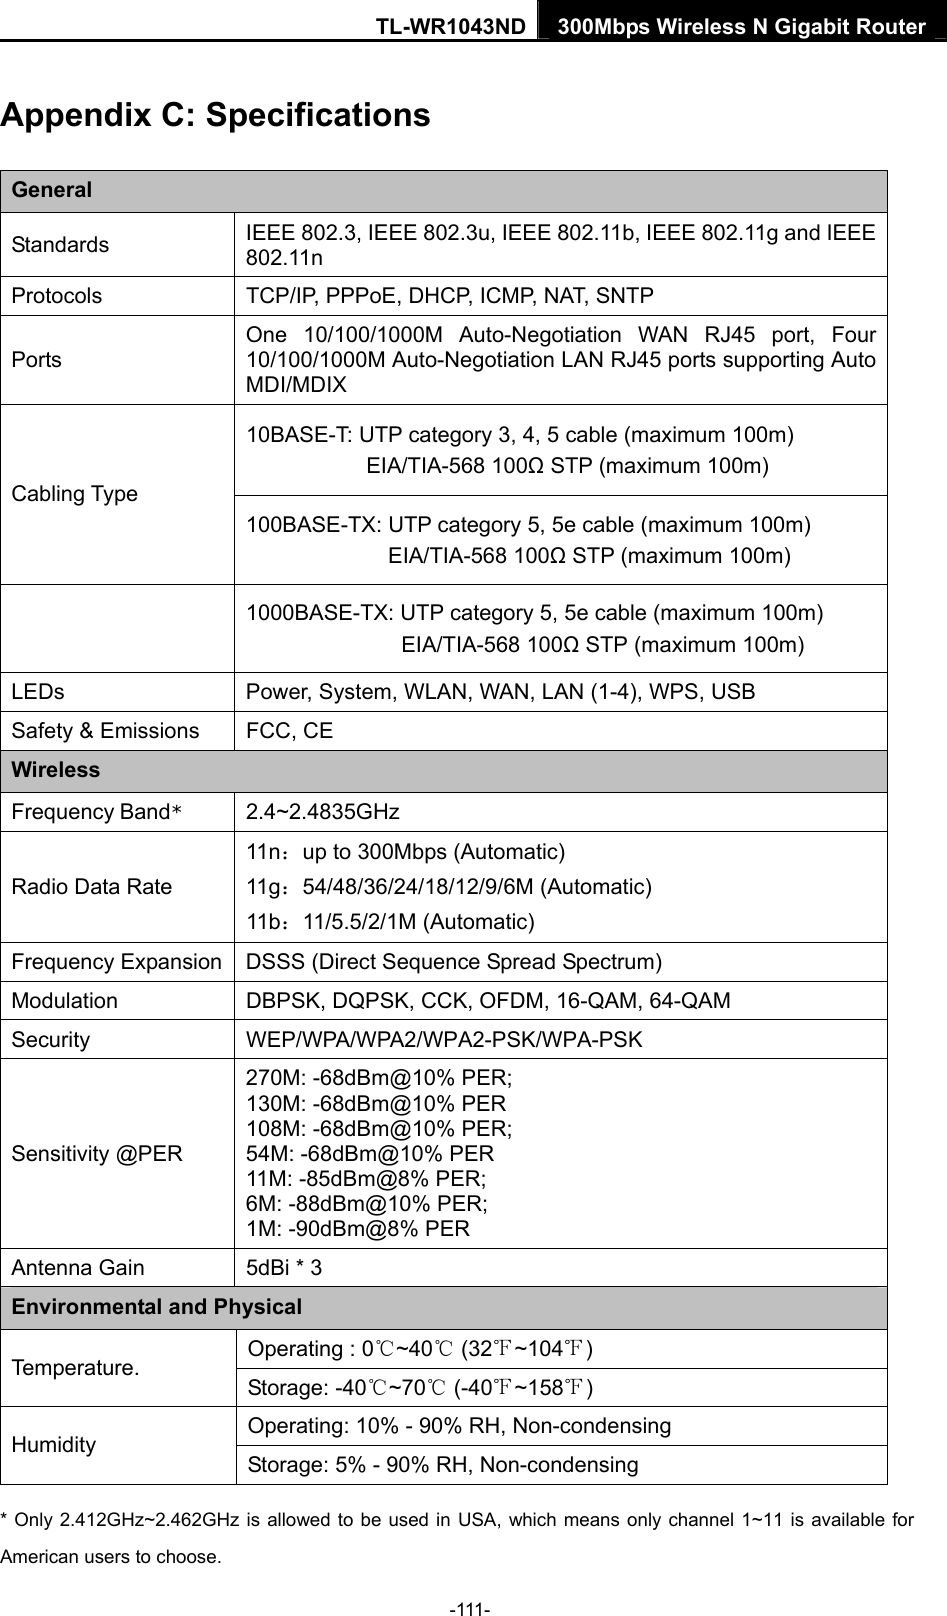 TL-WR1043ND 300Mbps Wireless N Gigabit Router  Appendix C: Specifications General Standards  IEEE 802.3, IEEE 802.3u, IEEE 802.11b, IEEE 802.11g and IEEE 802.11n Protocols  TCP/IP, PPPoE, DHCP, ICMP, NAT, SNTP Ports One 10/100/1000M Auto-Negotiation WAN RJ45 port, Four 10/100/1000M Auto-Negotiation LAN RJ45 ports supporting Auto MDI/MDIX 10BASE-T: UTP category 3, 4, 5 cable (maximum 100m) EIA/TIA-568 100Ω STP (maximum 100m) Cabling Type 100BASE-TX: UTP category 5, 5e cable (maximum 100m) EIA/TIA-568 100Ω STP (maximum 100m)  1000BASE-TX: UTP category 5, 5e cable (maximum 100m) EIA/TIA-568 100Ω STP (maximum 100m) LEDs  Power, System, WLAN, WAN, LAN (1-4), WPS, USB Safety &amp; Emissions  FCC, CE Wireless Frequency Band* 2.4~2.4835GHz Radio Data Rate 11n：up to 300Mbps (Automatic) 11g：54/48/36/24/18/12/9/6M (Automatic) 11b：11/5.5/2/1M (Automatic) Frequency Expansion DSSS (Direct Sequence Spread Spectrum) Modulation  DBPSK, DQPSK, CCK, OFDM, 16-QAM, 64-QAM Security WEP/WPA/WPA2/WPA2-PSK/WPA-PSK Sensitivity @PER 270M: -68dBm@10% PER; 130M: -68dBm@10% PER 108M: -68dBm@10% PER;   54M: -68dBm@10% PER 11M: -85dBm@8% PER;   6M: -88dBm@10% PER; 1M: -90dBm@8% PER Antenna Gain  5dBi * 3   Environmental and Physical Operating : 0~40 (32 ~104) Temperature.  Storage: -40~70 (-40~158) Operating: 10% - 90% RH, Non-condensing Humidity  Storage: 5% - 90% RH, Non-condensing * Only 2.412GHz~2.462GHz is allowed to be used in USA, which means only channel 1~11 is available for American users to choose. -111- 